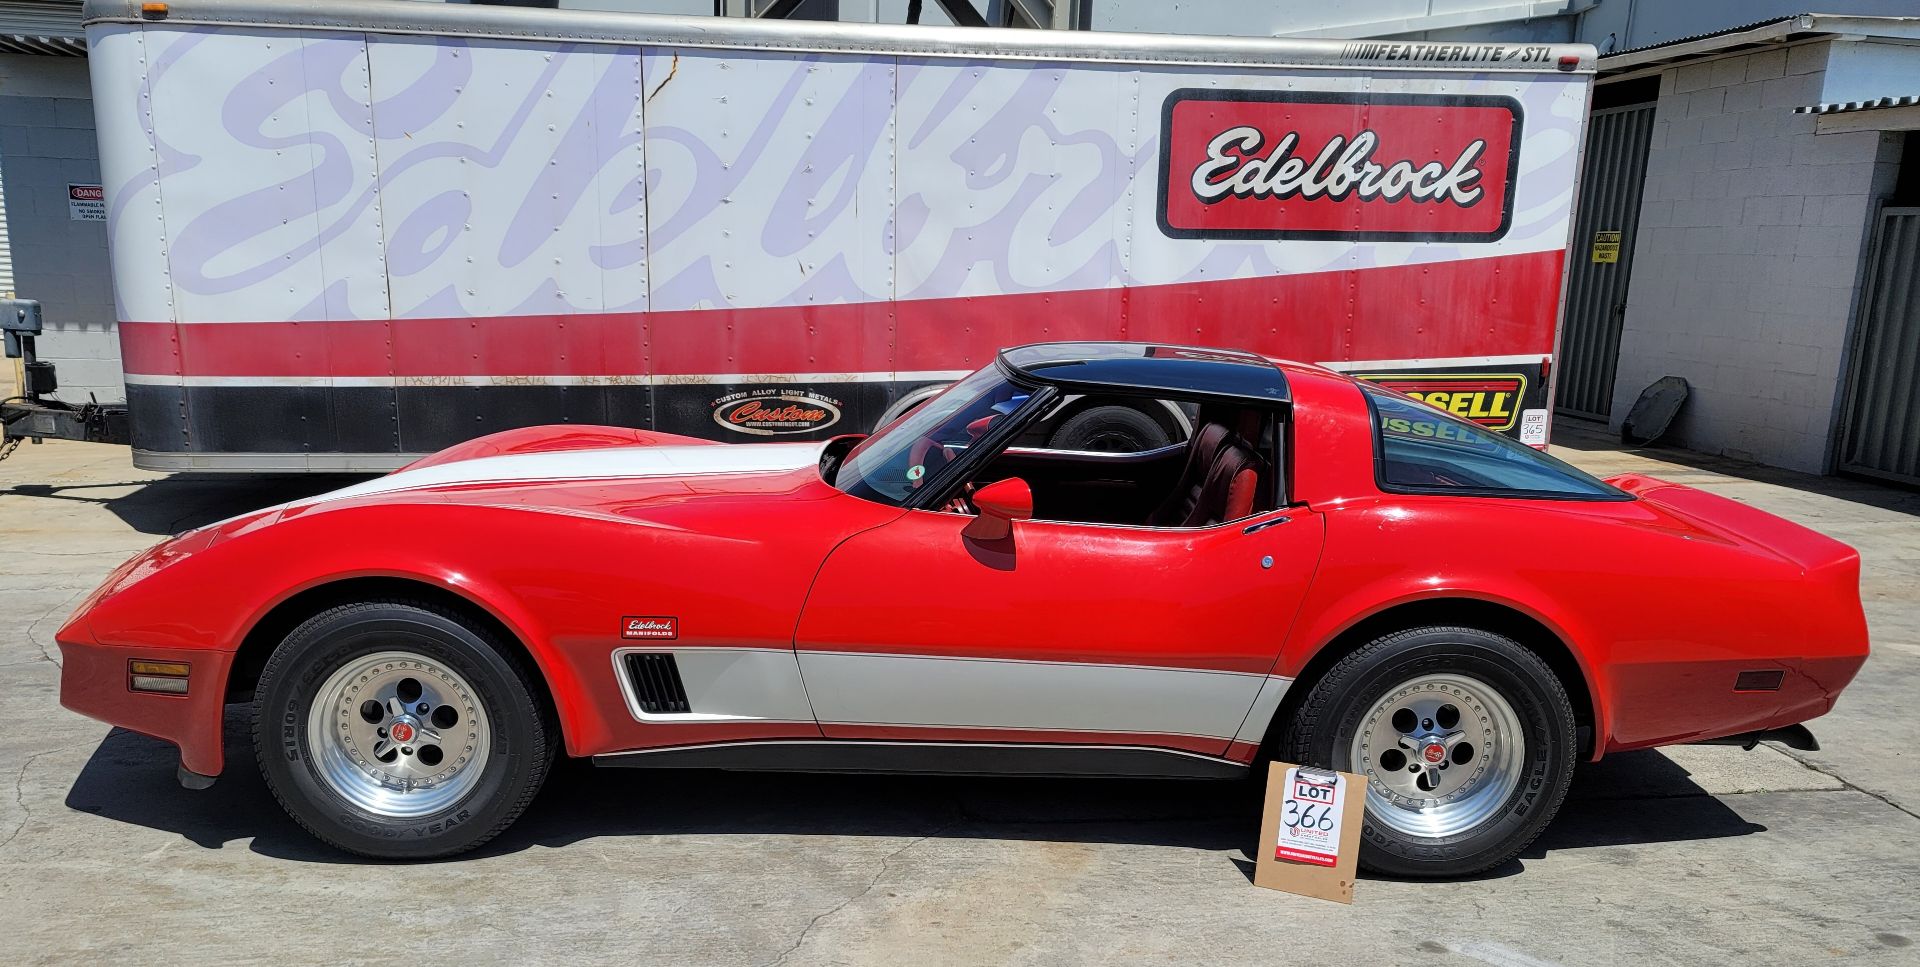 1980 CHEVROLET CORVETTE, WAS VIC EDELBROCK'S PERSONAL CAR BOUGHT FOR R&D, RED INTERIOR, TITLE ONLY. - Image 2 of 70